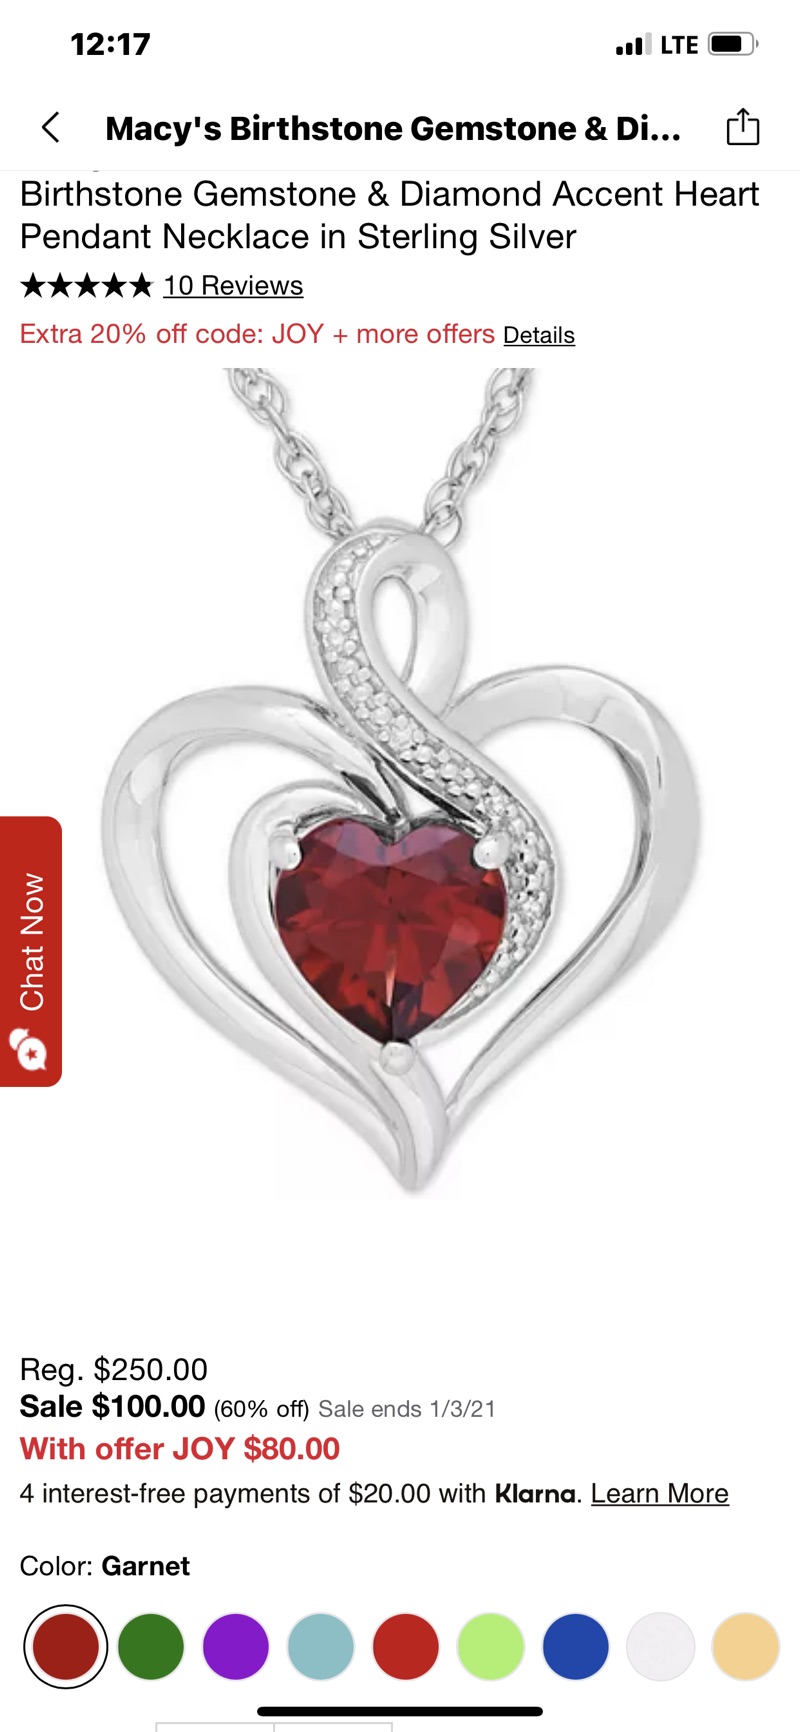 Macy's Birthstone Gemstone & Diamond Accent Heart Pendant Necklace in Sterling Silver & Reviews - Necklaces - Jewelry & Watches - Macy's红宝石项链